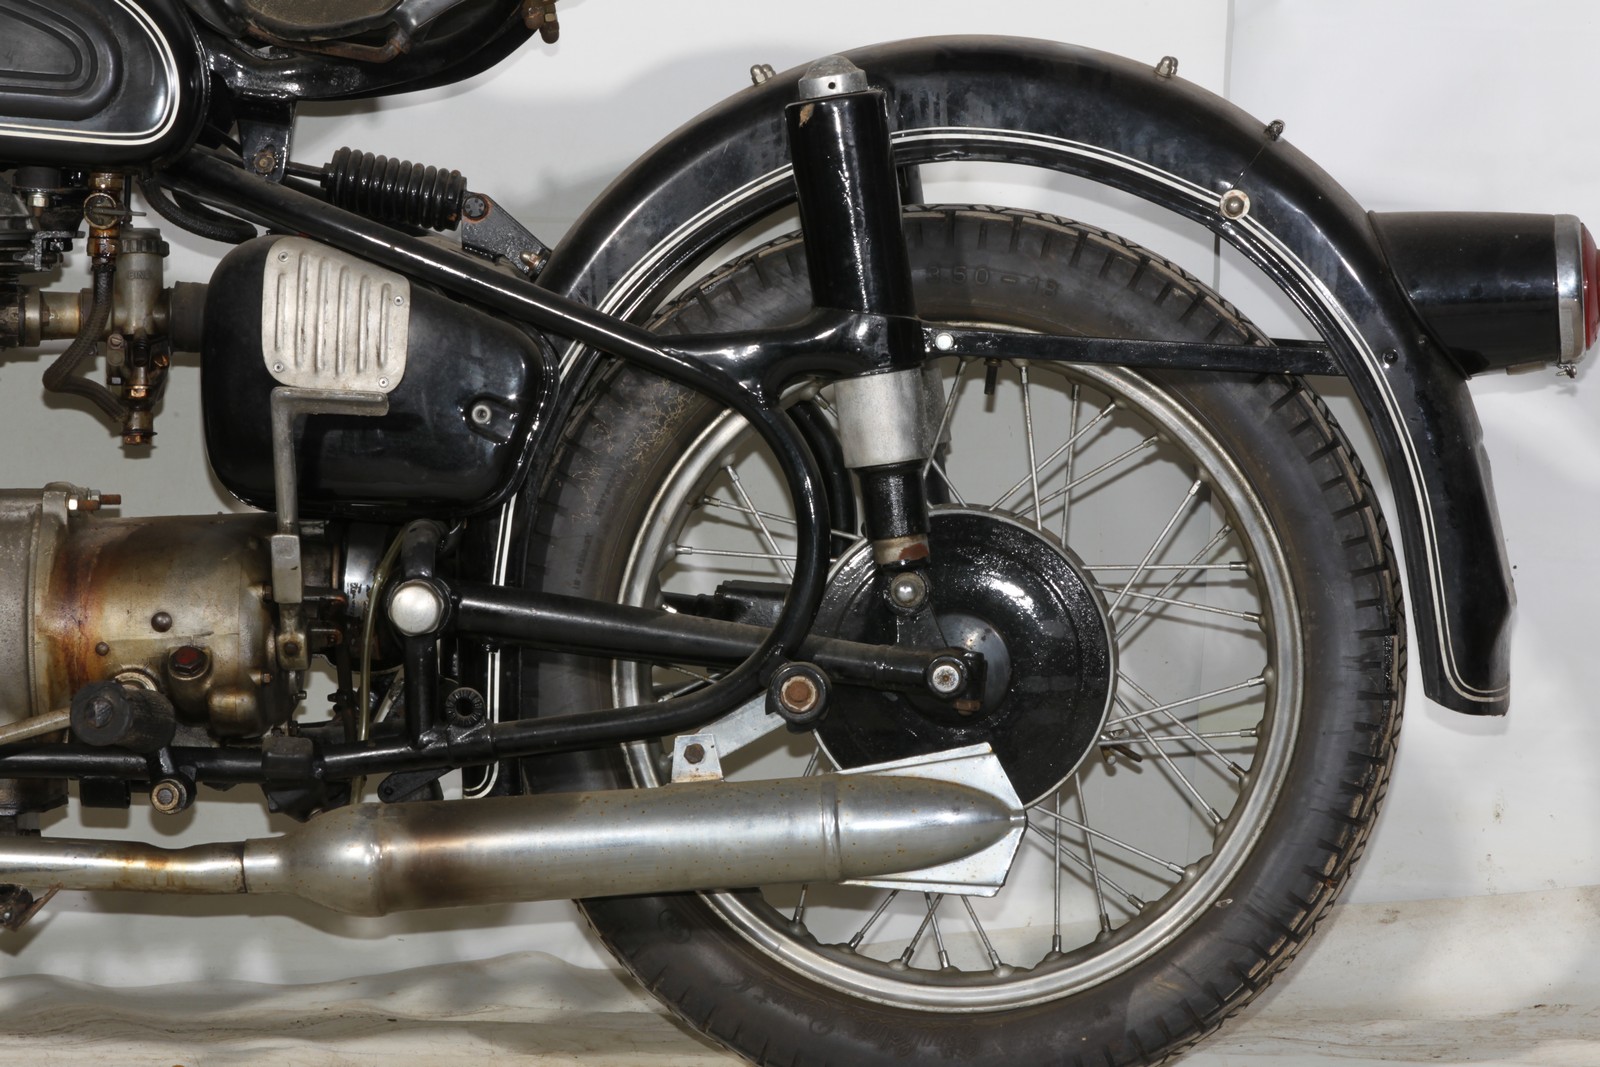 1960s BMW R27 247cc OHV Shaft Drive - Image 5 of 8